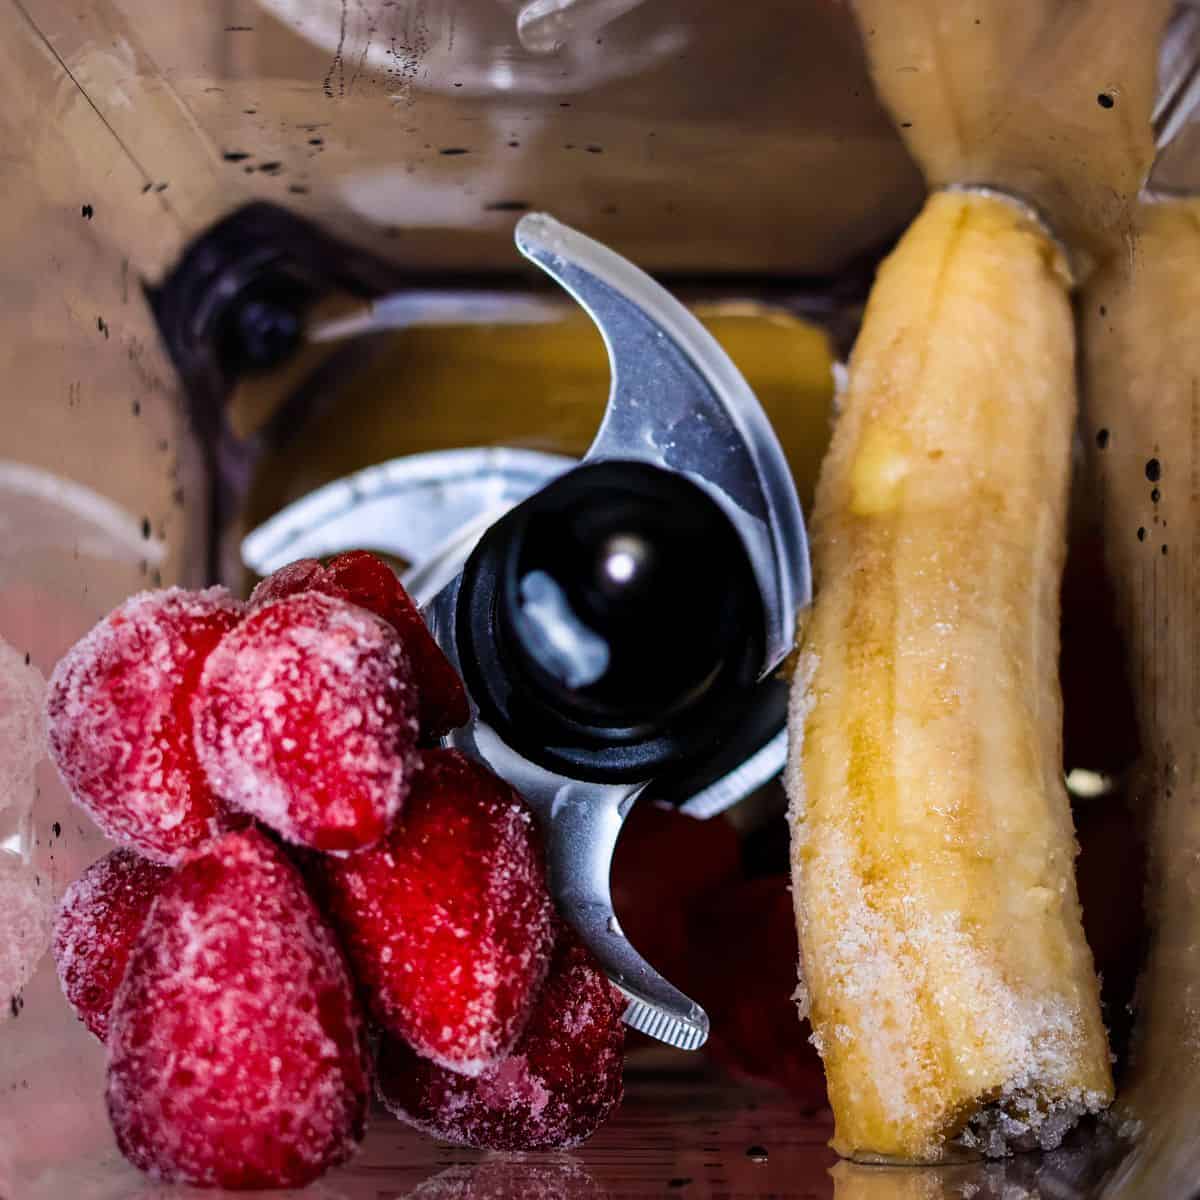 Ingredients ready for blending: frozen strawberries and a banana in the bottom of a blender with a layer of ice crystals on top, indicating they are frozen.